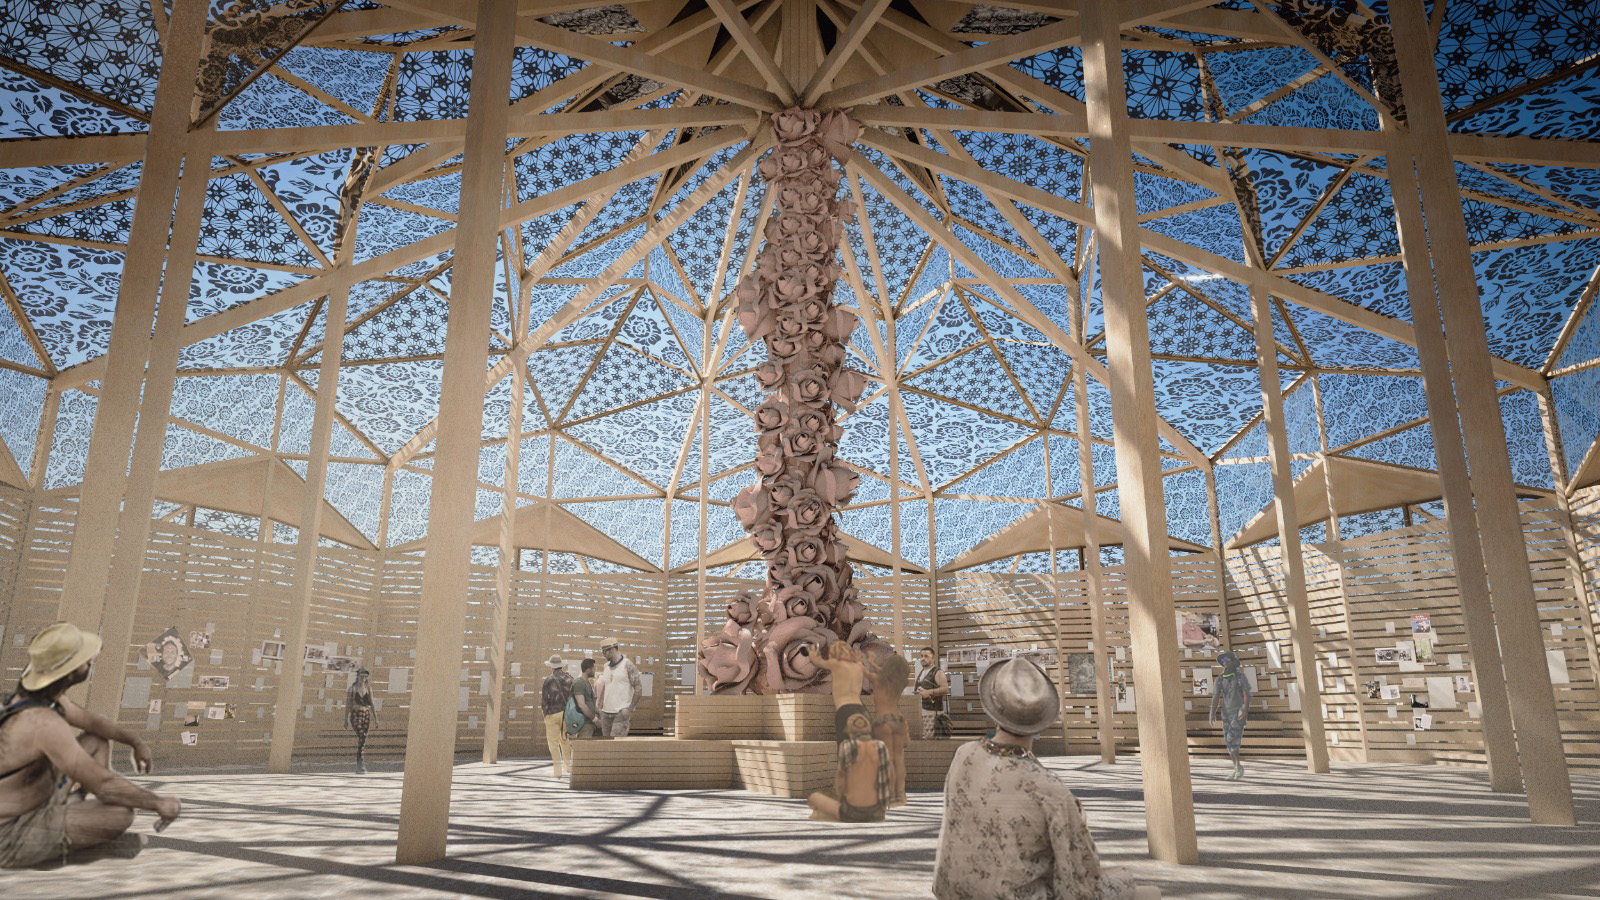 Introducing Your 2023 Temple Temple of the Heart Burning Man Journal